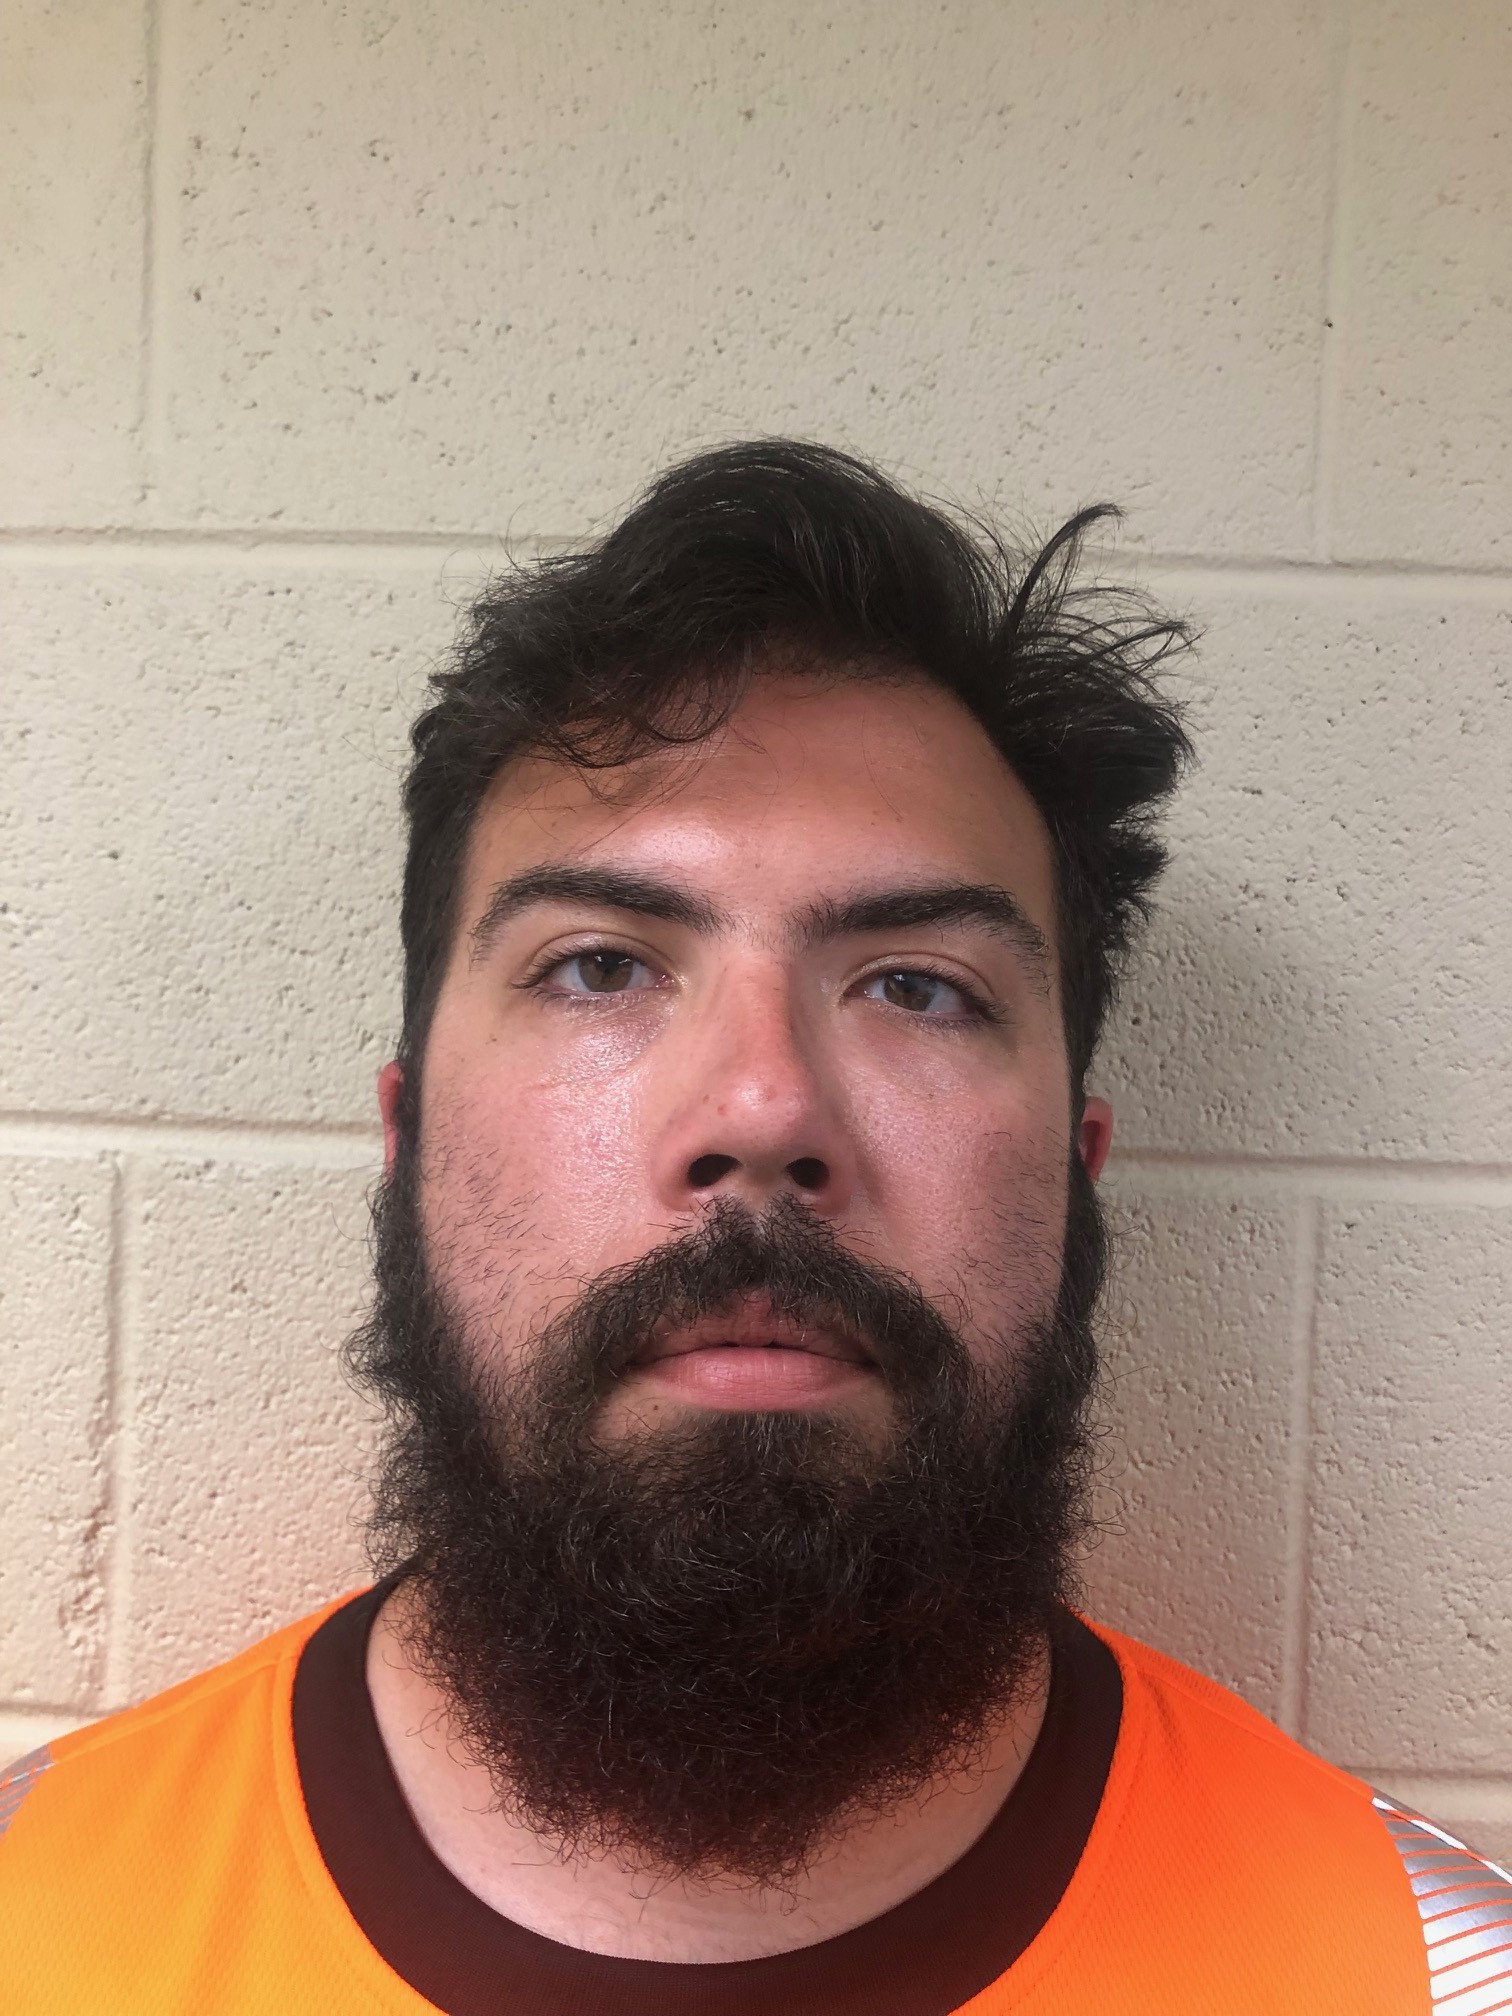 Essex Man Arrested on Pornography Charges